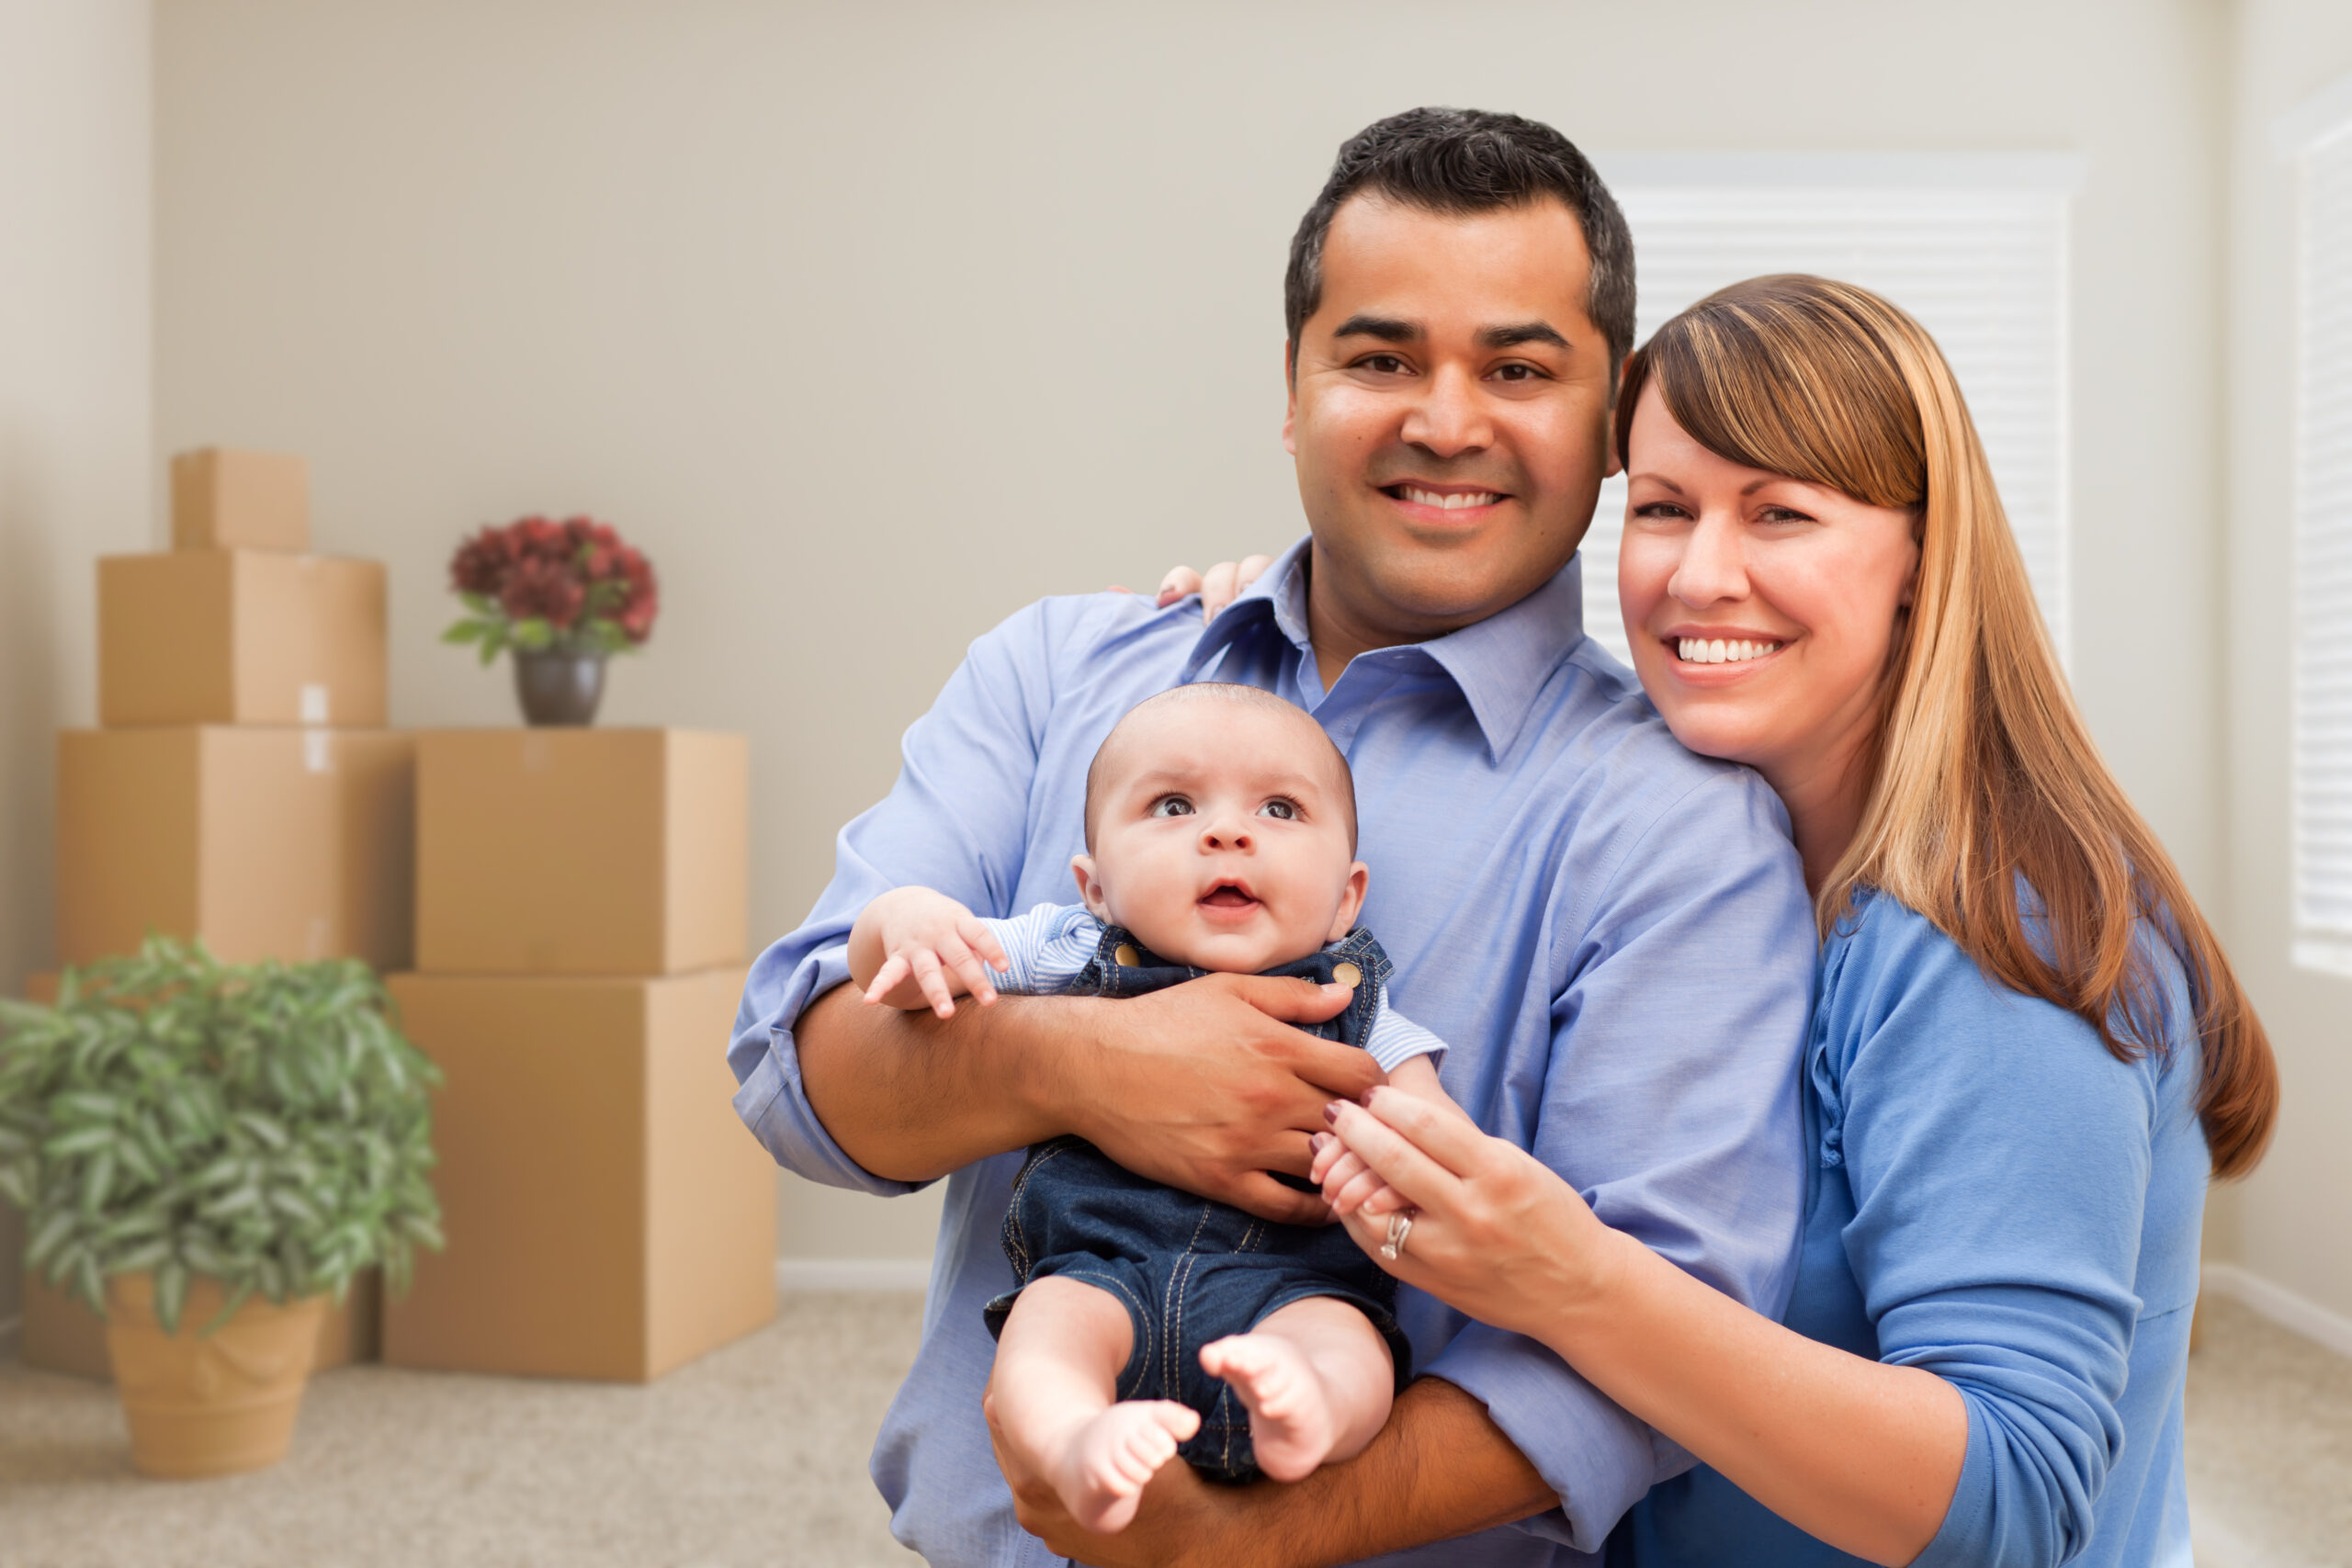 Happy Mixed Race Family with Baby in Room with Packed Moving Boxes.